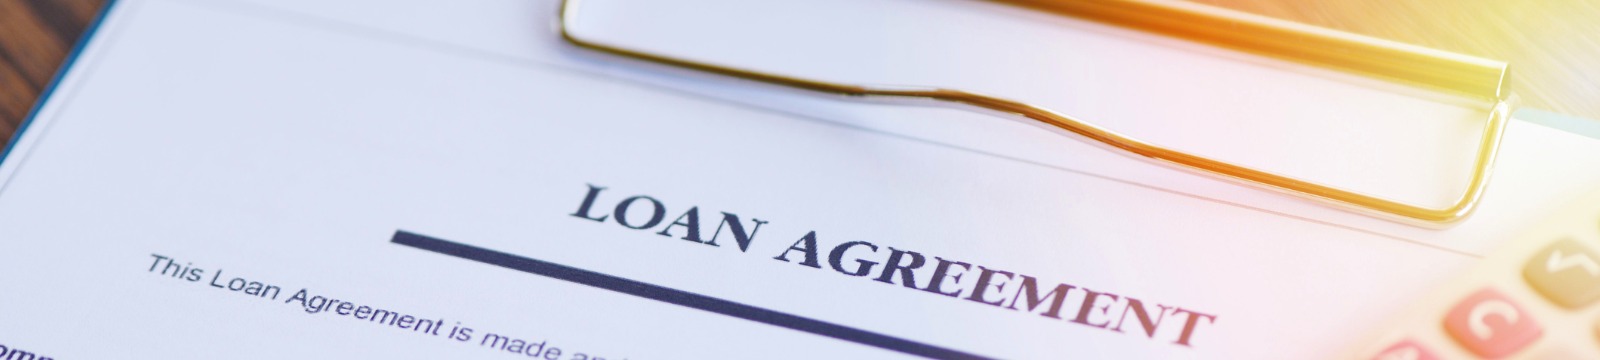 picture of loan agreement form